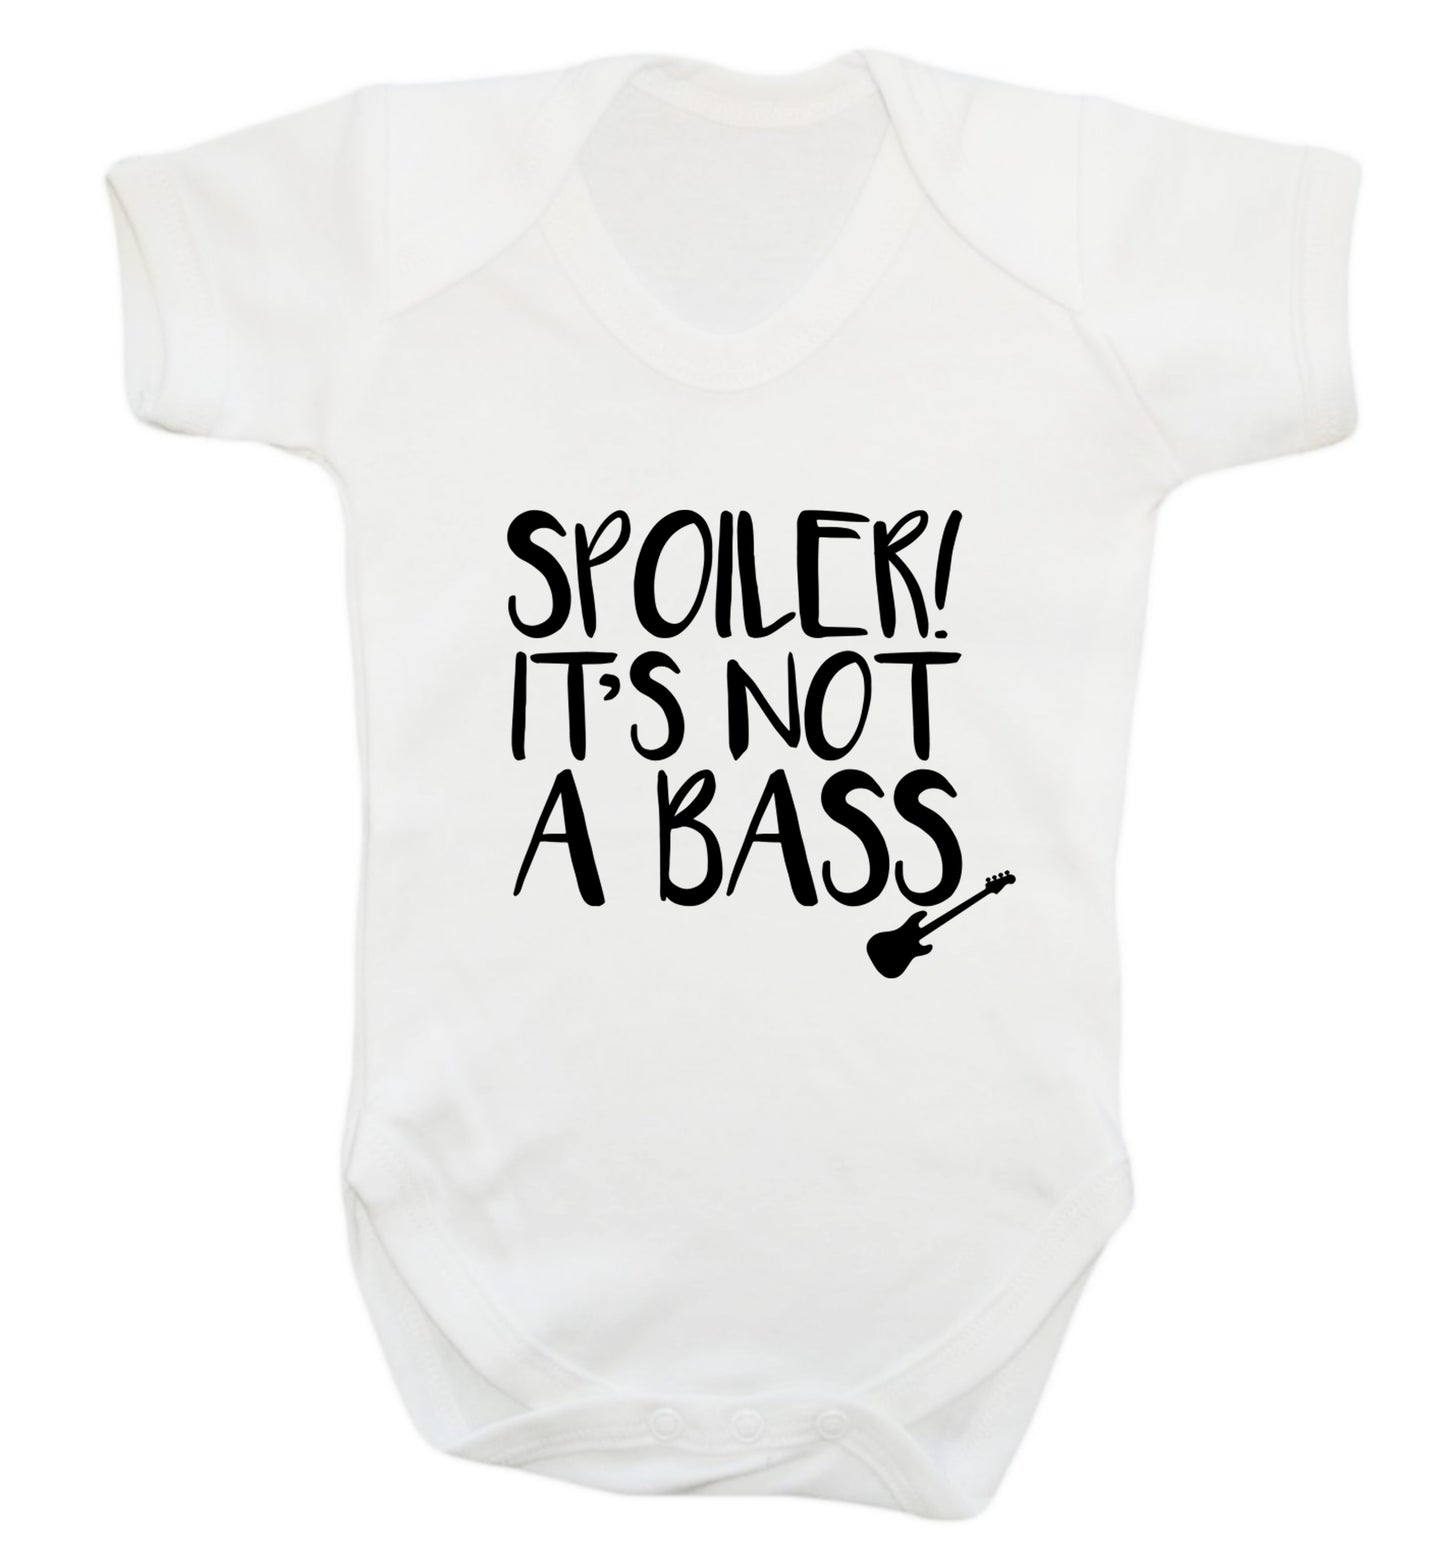 Spoiler it's not a bass Baby Vest white 18-24 months